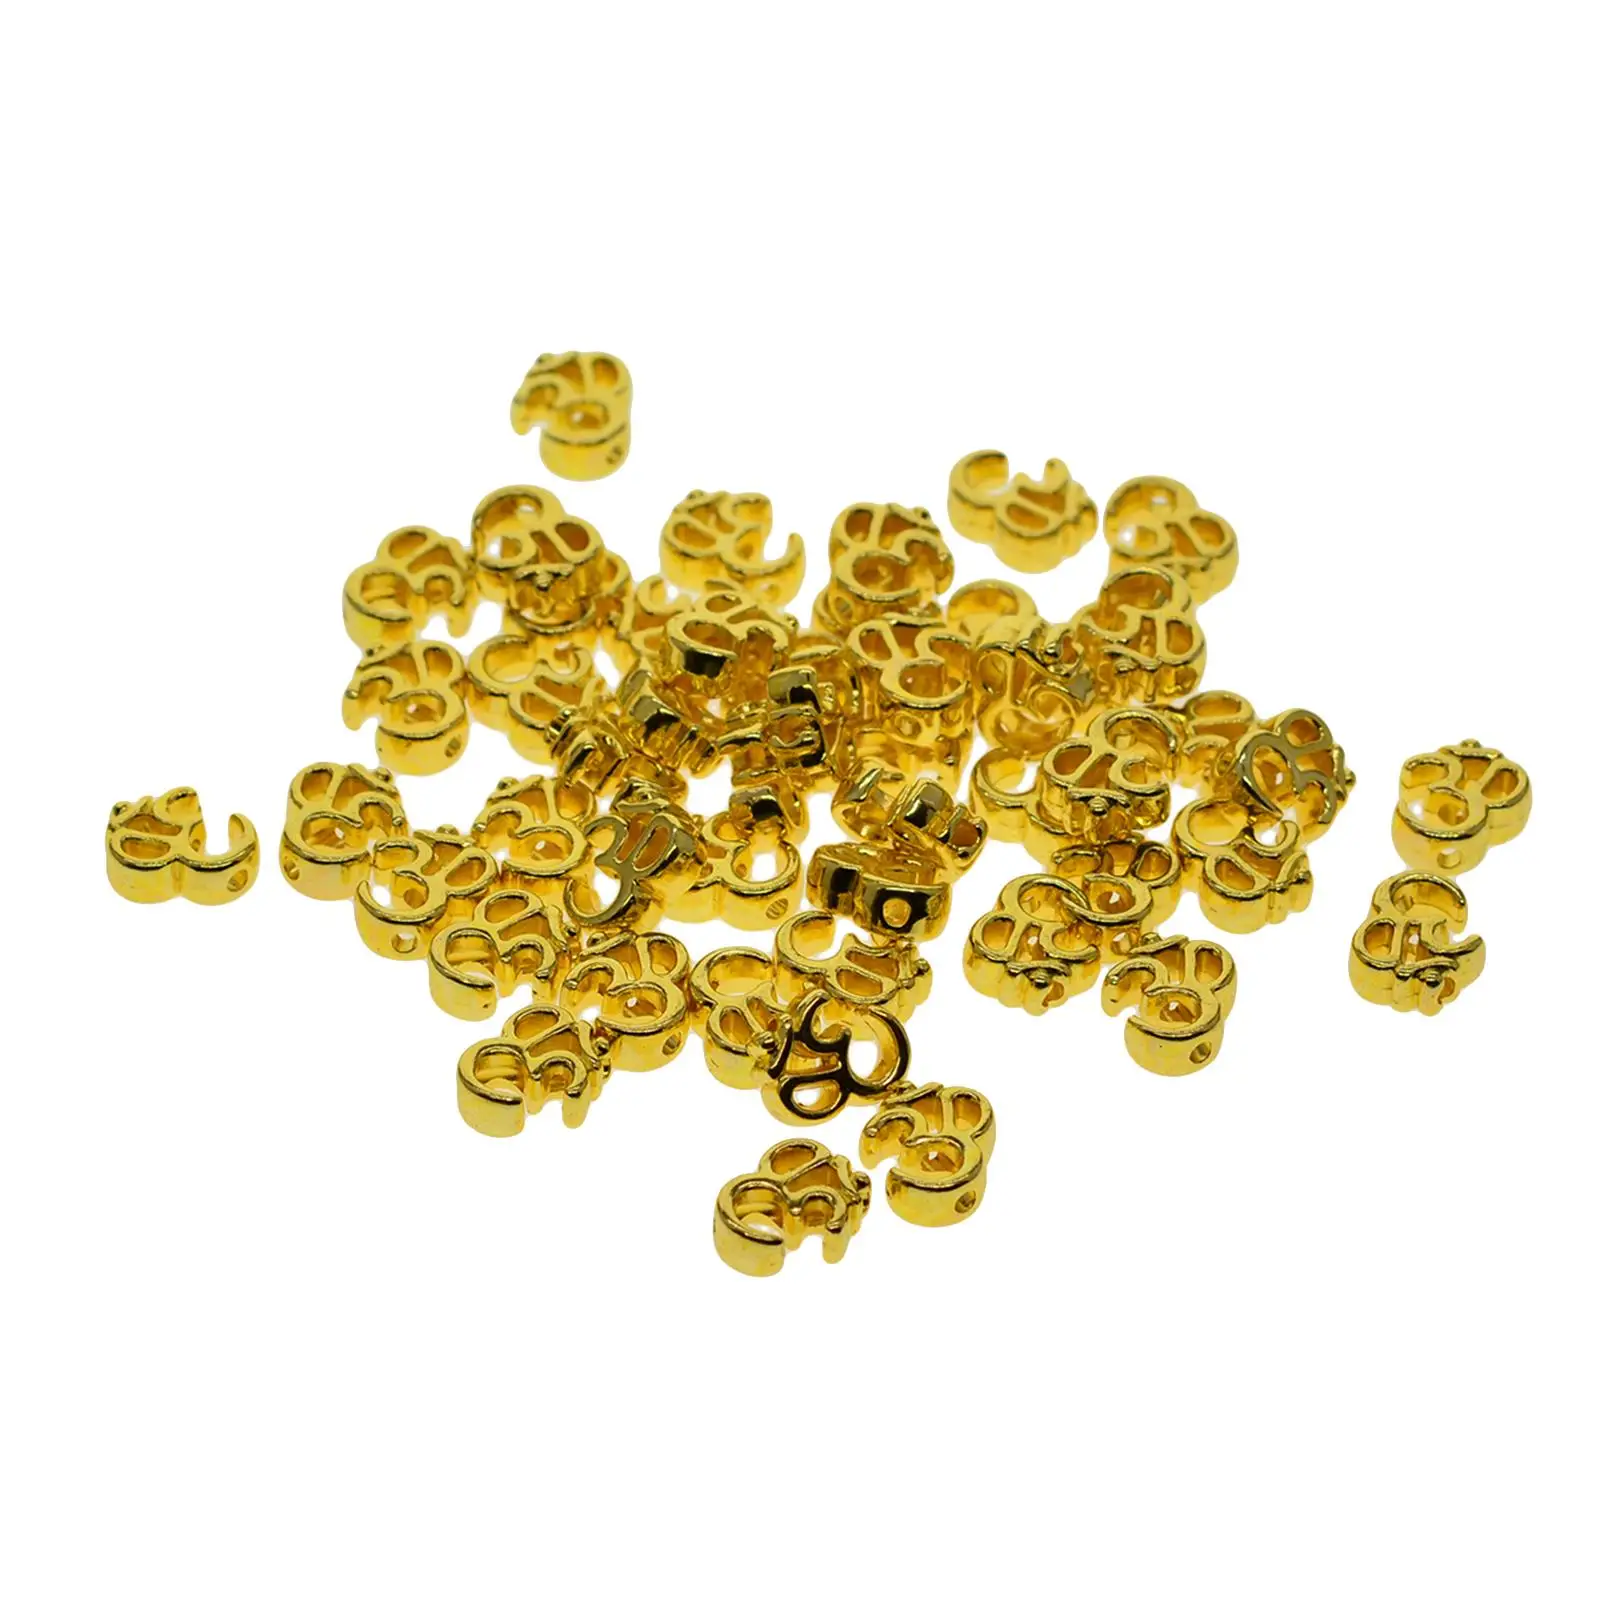 50Pcs Yoga OM Spacer Beads DIY Pendants Connectors Gold Decorative Charms for Clothing Accessories Hats Keychain Sweaters Chains